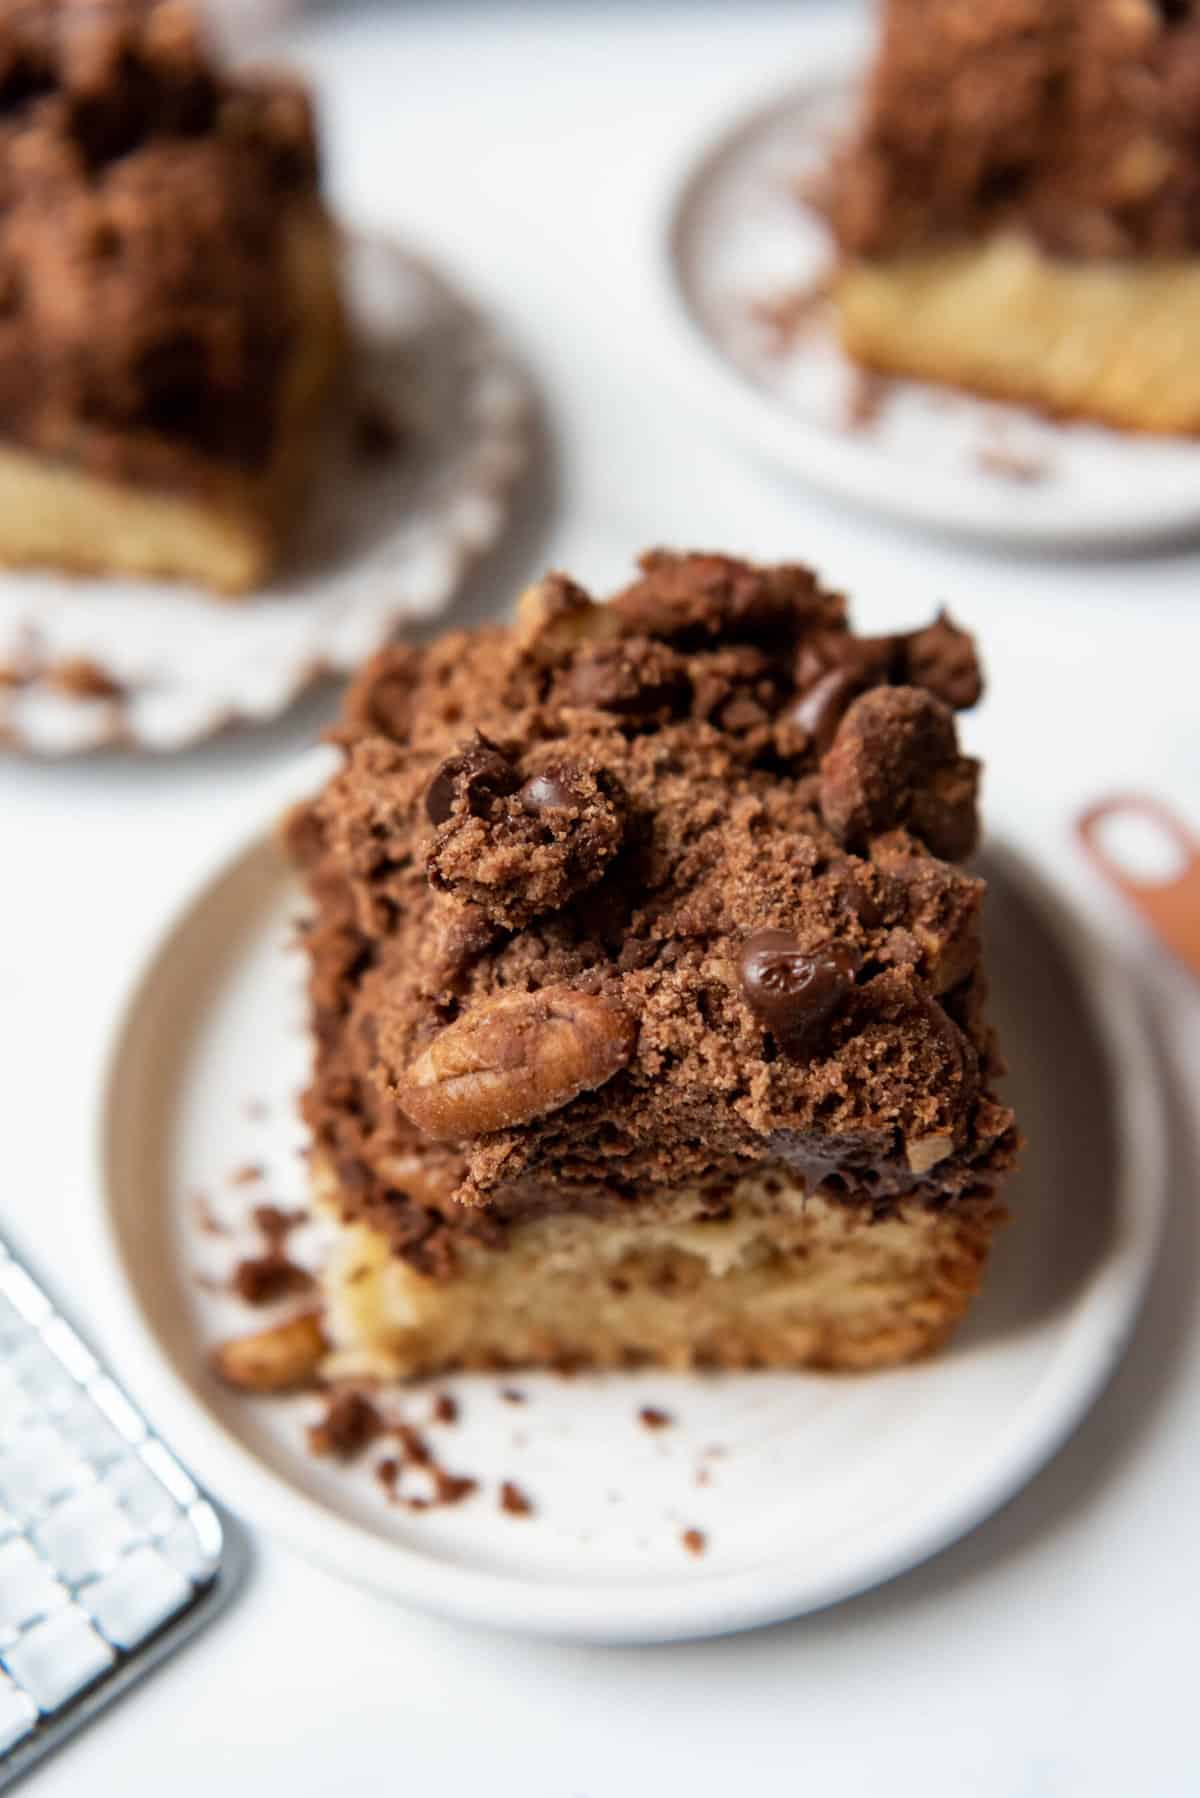 A slice of chocolate pecan crumb cake with chocolate chips and chopped pecans.